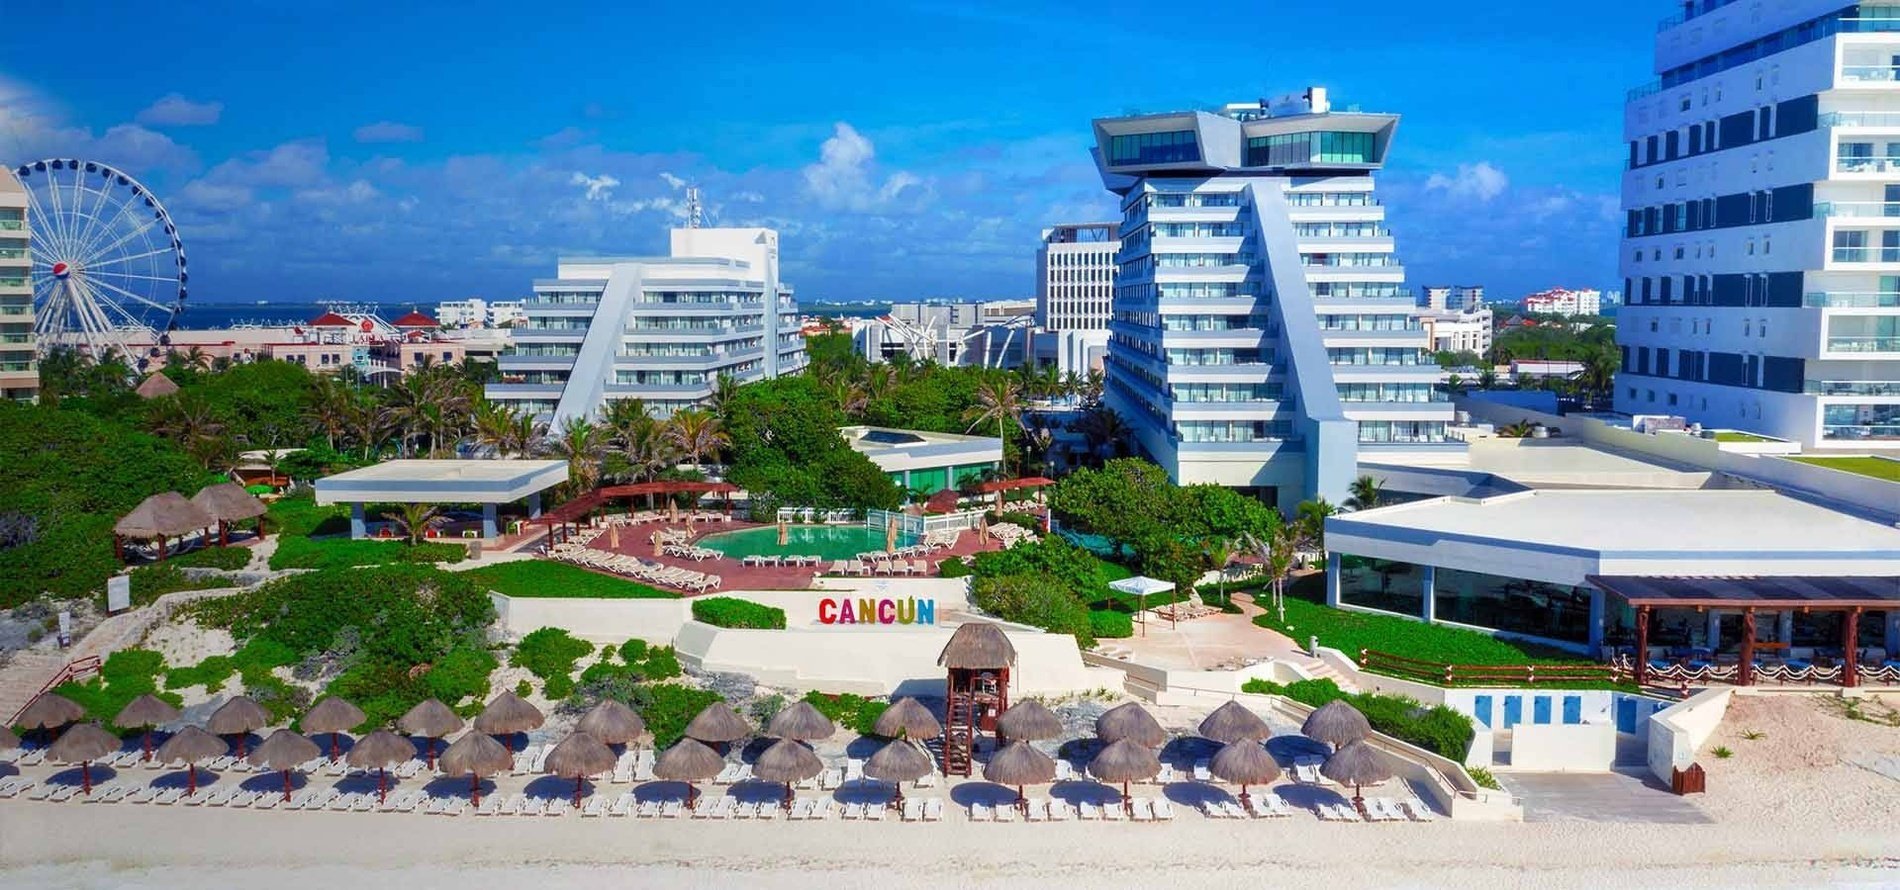 Overview of the facilities of the Park Royal Beach Cancun Hotel in the Mexican Caribbean